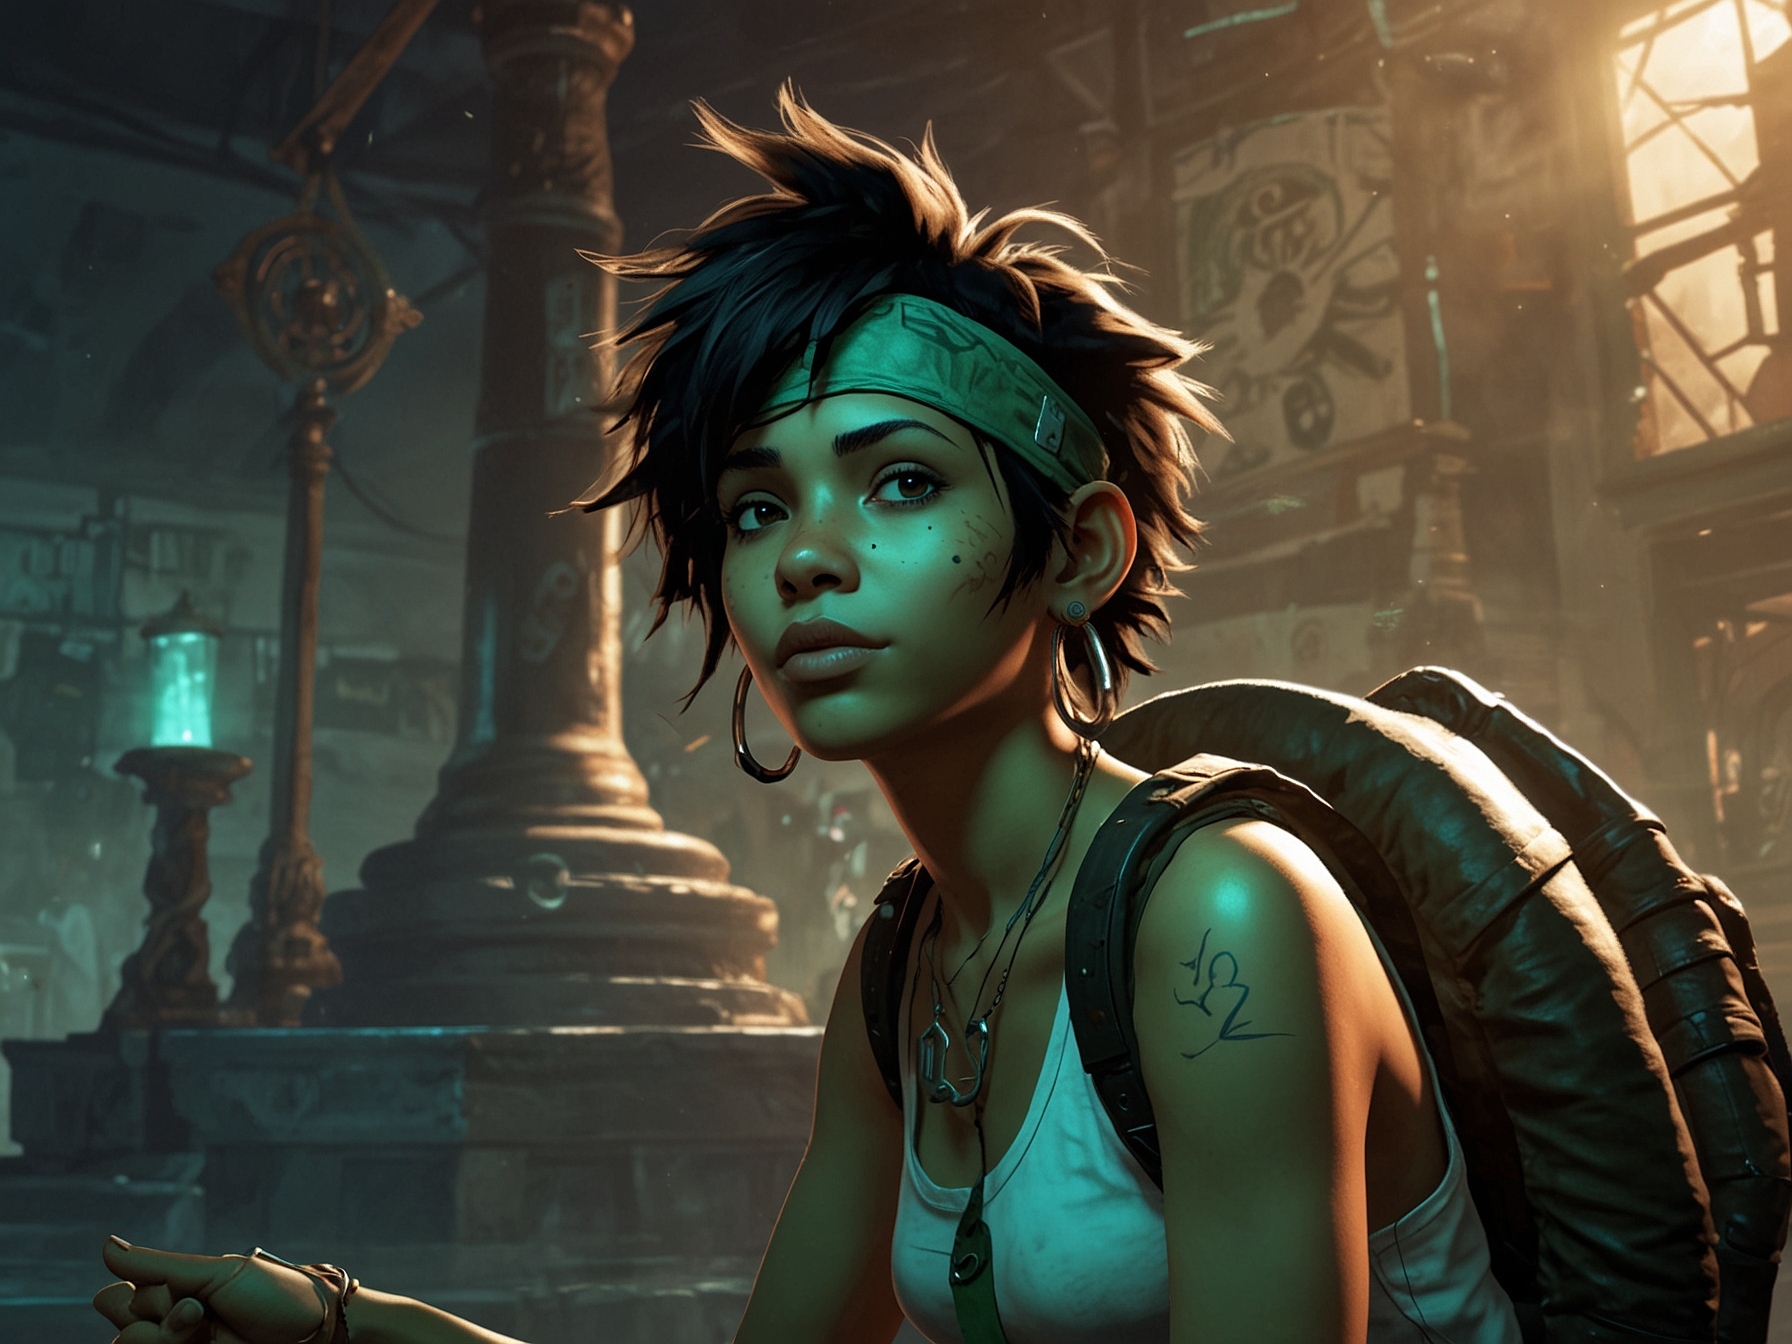 Fans eagerly await the Beyond Good and Evil - 20th Anniversary Edition, featuring modern enhancements like 4K resolution, 60 FPS, and exclusive new content, available on multiple platforms starting June 25th.